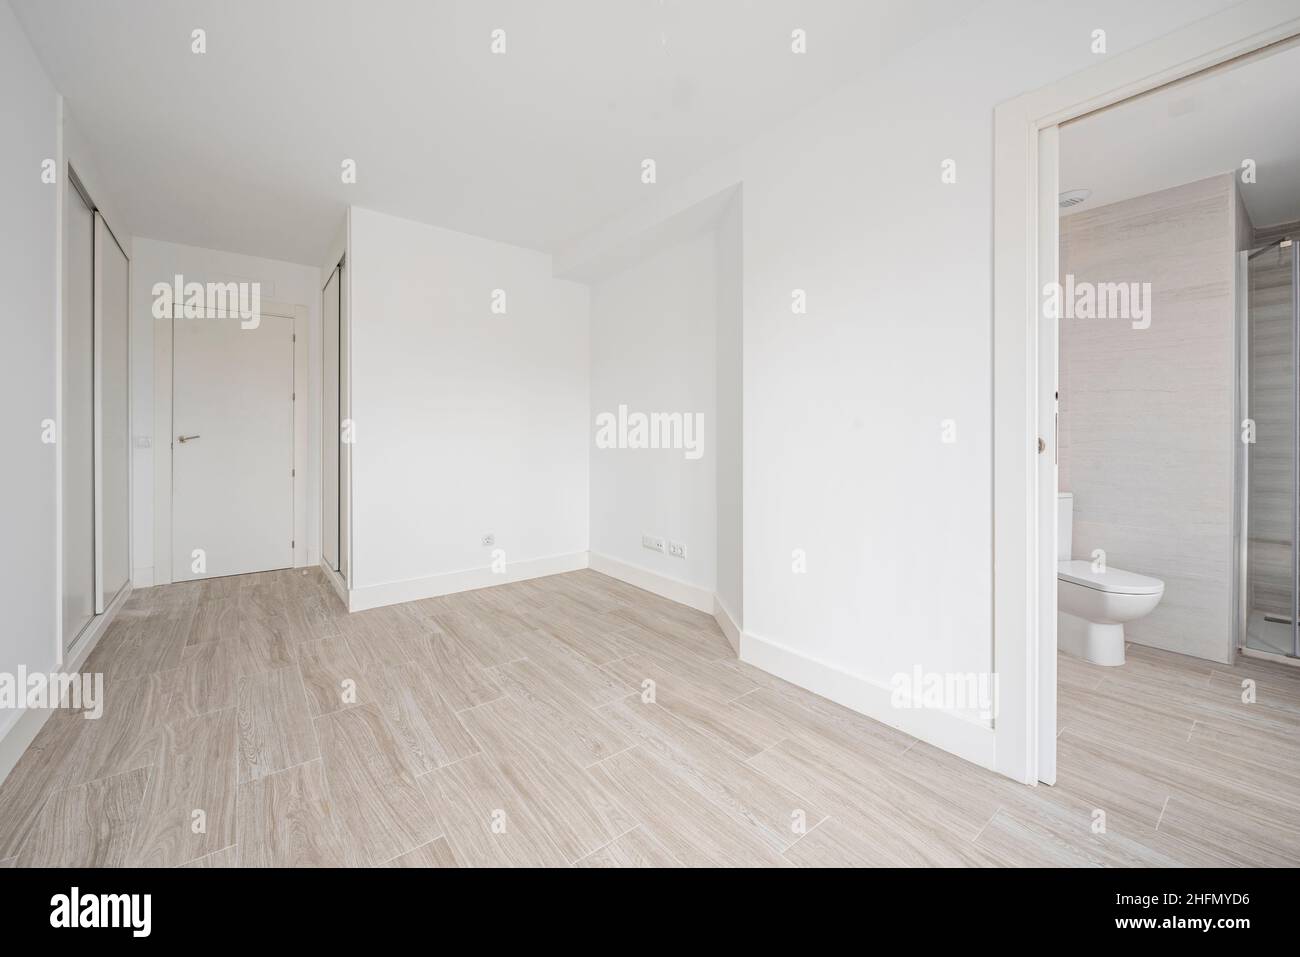 Empty room with white fitted wardrobes, white walls and wood-like ceramic tile floors and en-suite bathroom Stock Photo